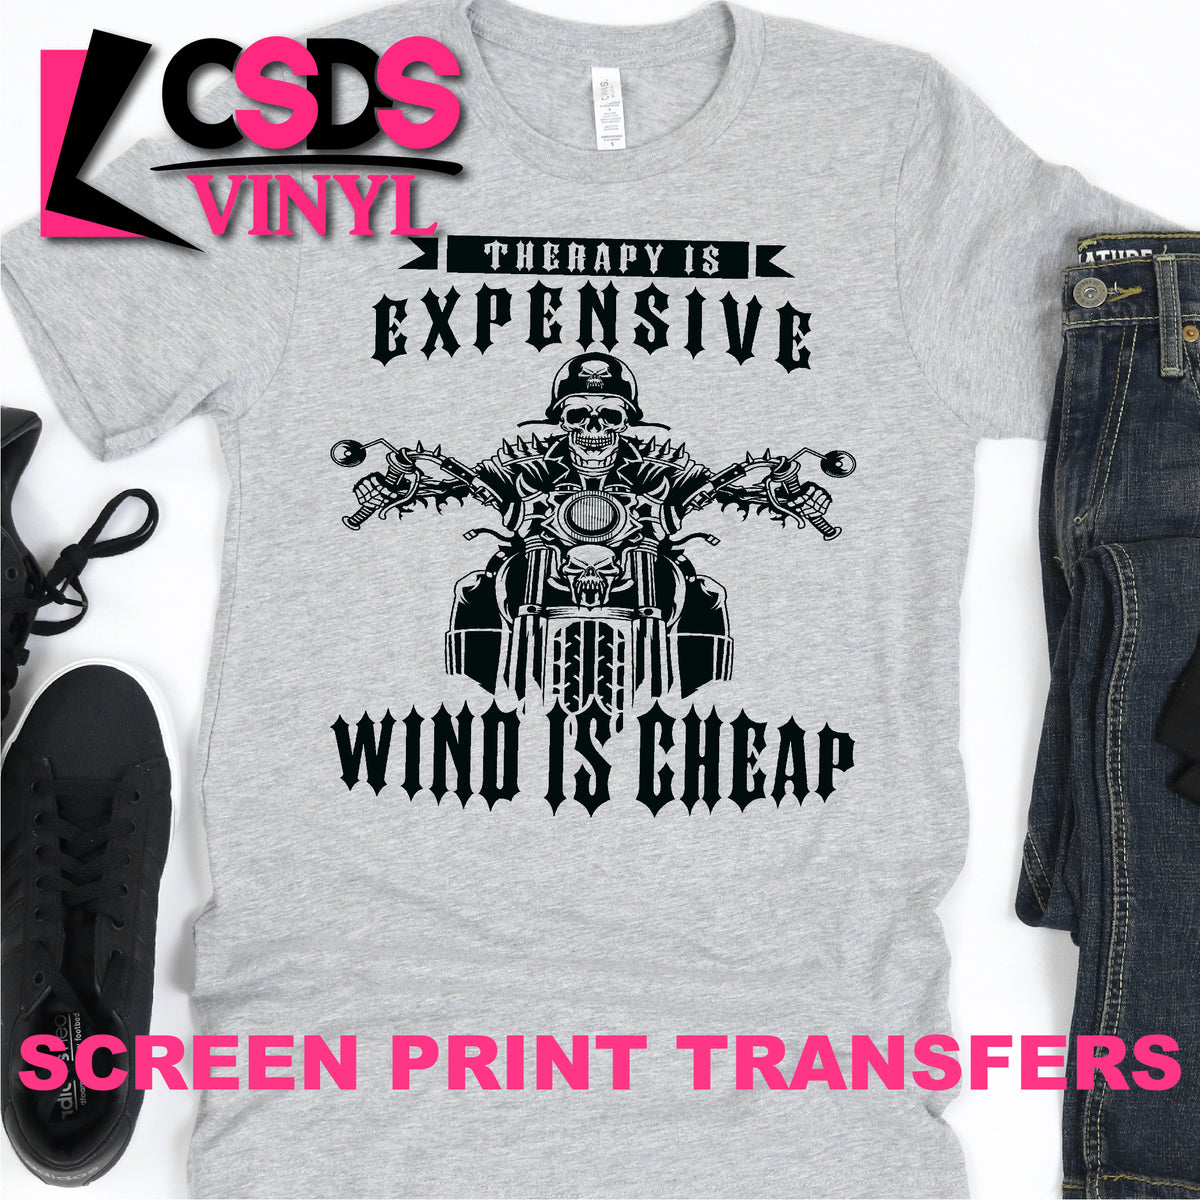 Screen Printing, Heat Transfer and Direct to Garment for Custom T Shirts -  Clash Graphics